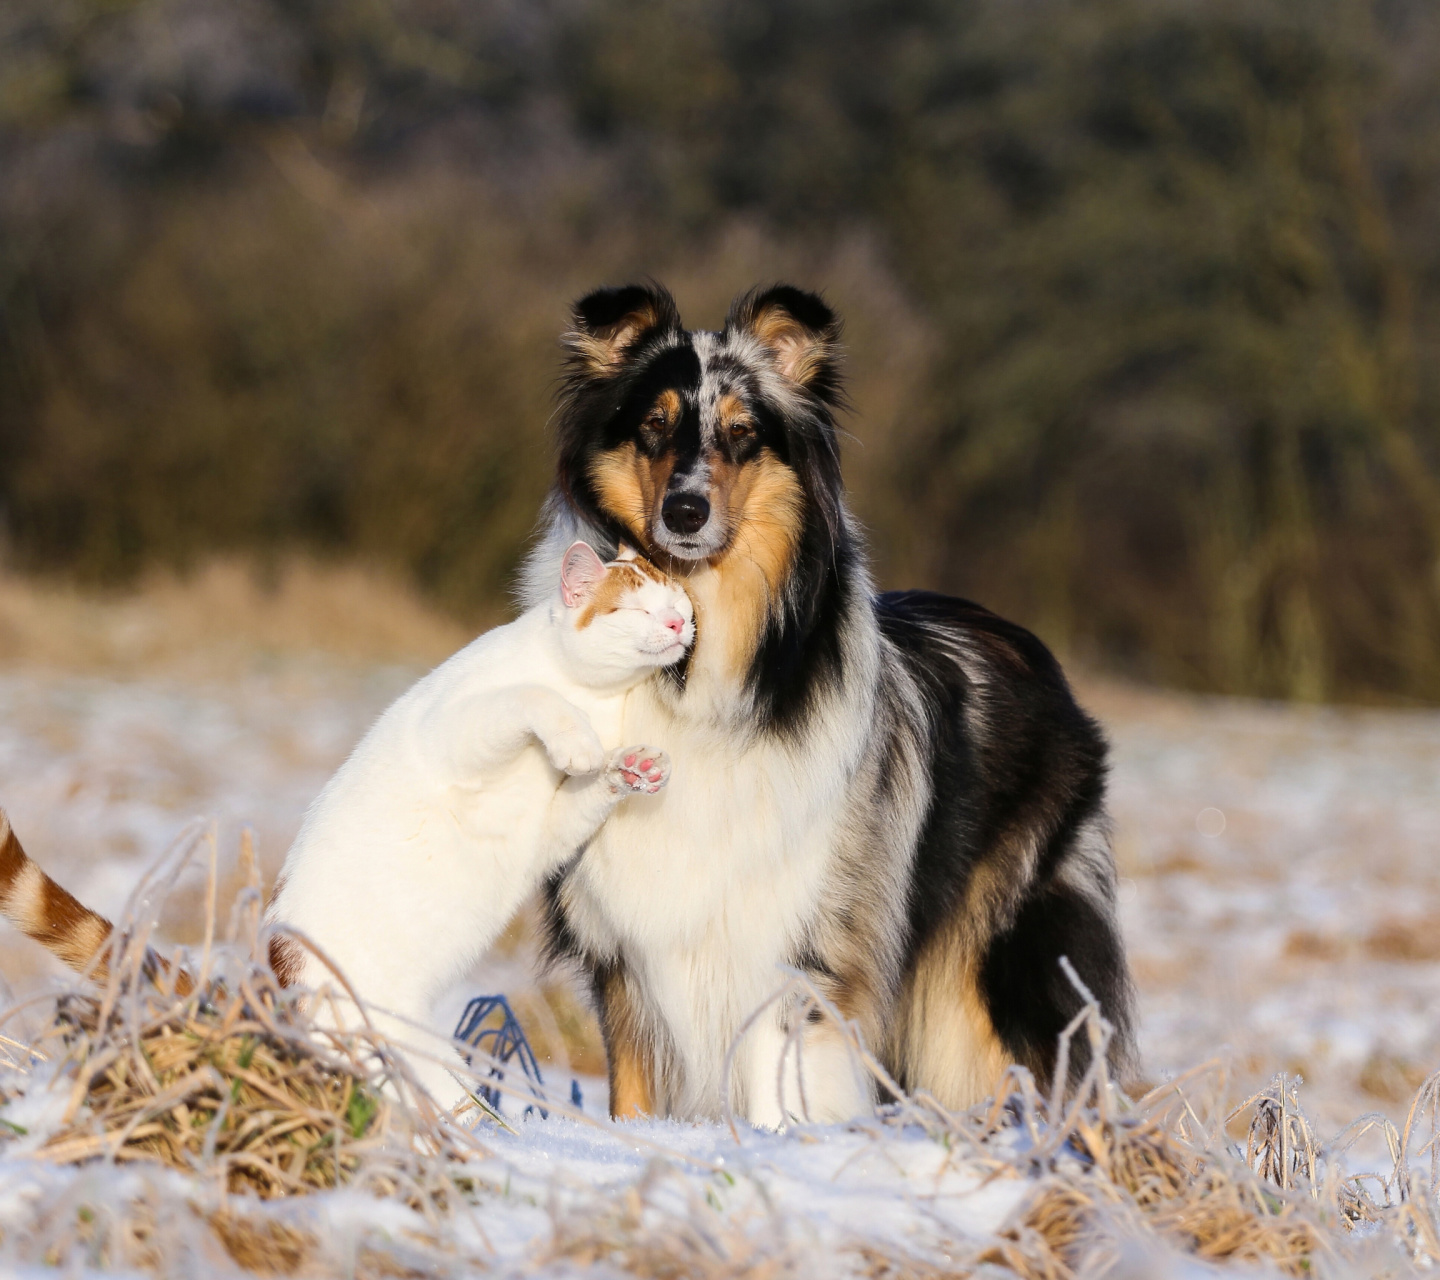 Friendship Cat and Dog Collie wallpaper 1440x1280